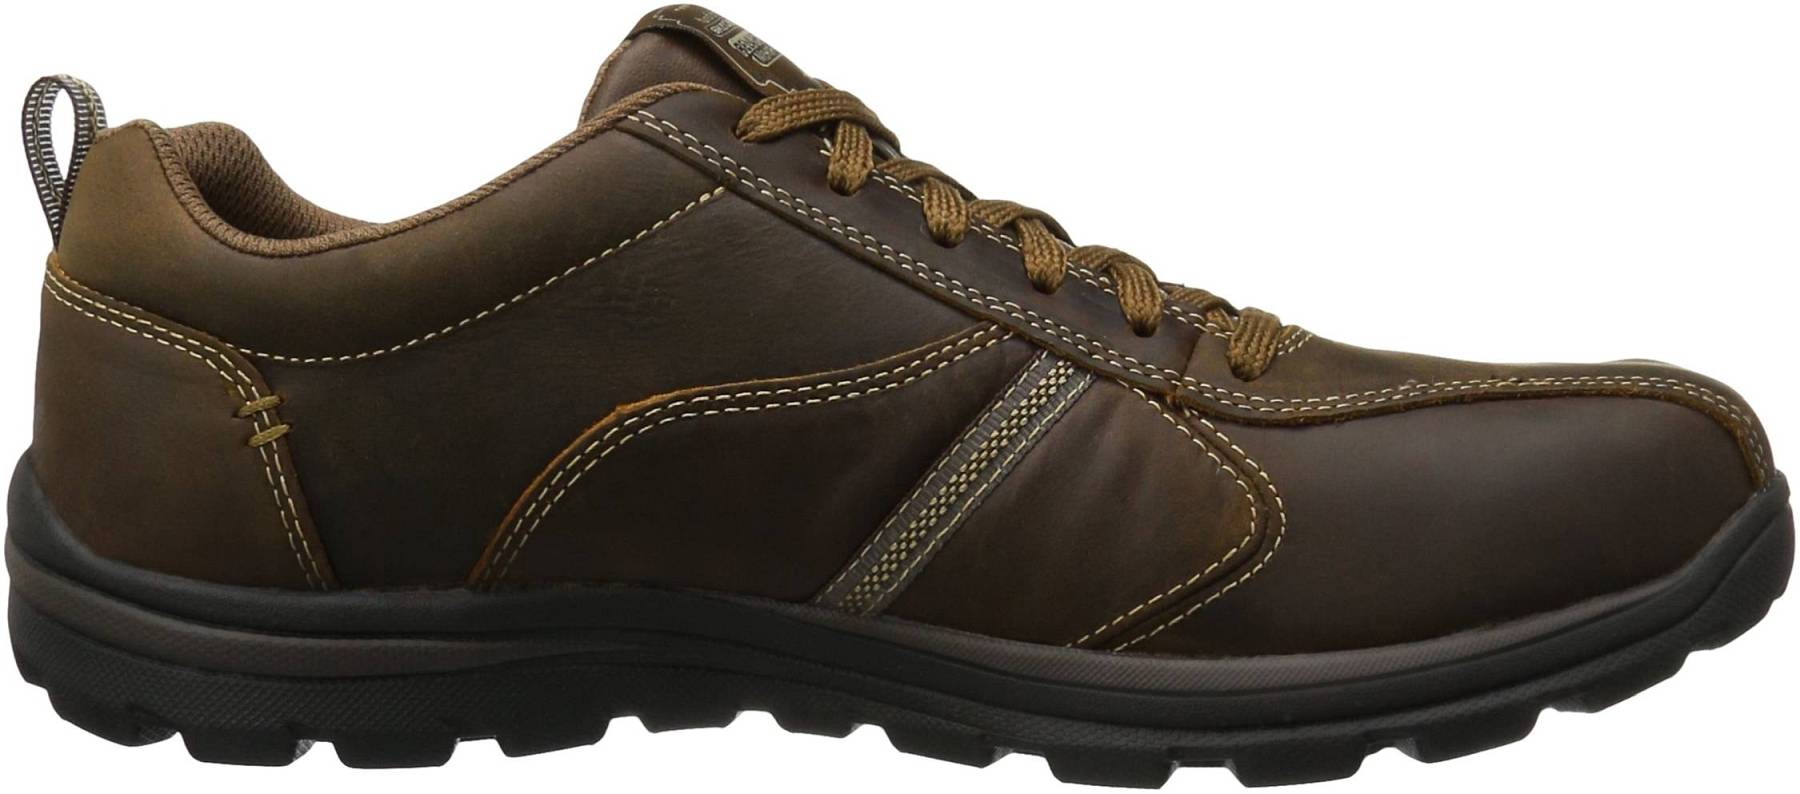 Skechers Relaxed Fit: Superior - Levoy – Shoes Reviews & Reasons To Buy